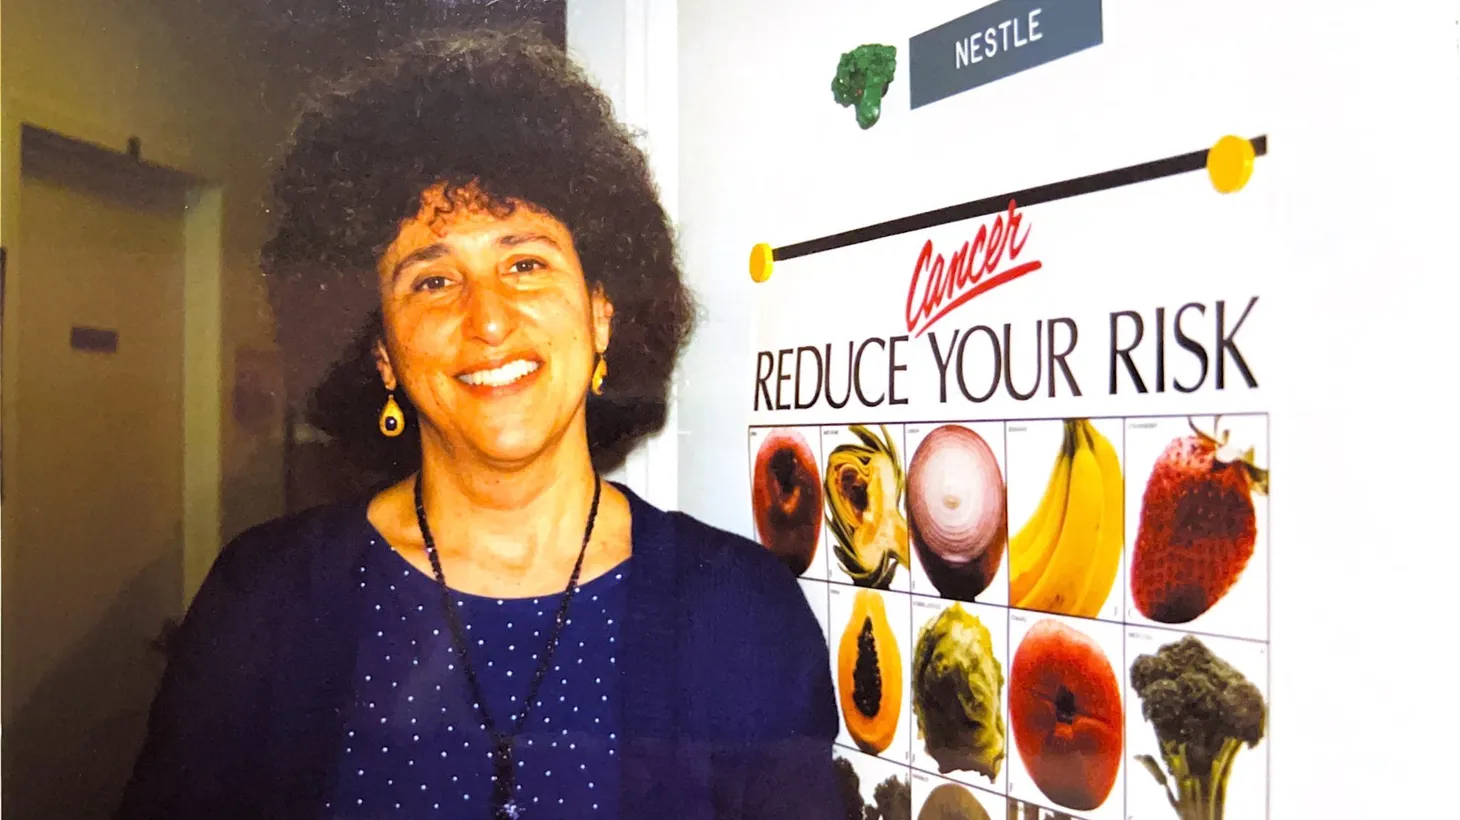 “Teaching has always been about trying to explain nutrition concepts clearly, in a way everyone can understand,” writes Marion Nestle, seen here in 1991, in her new memoir.